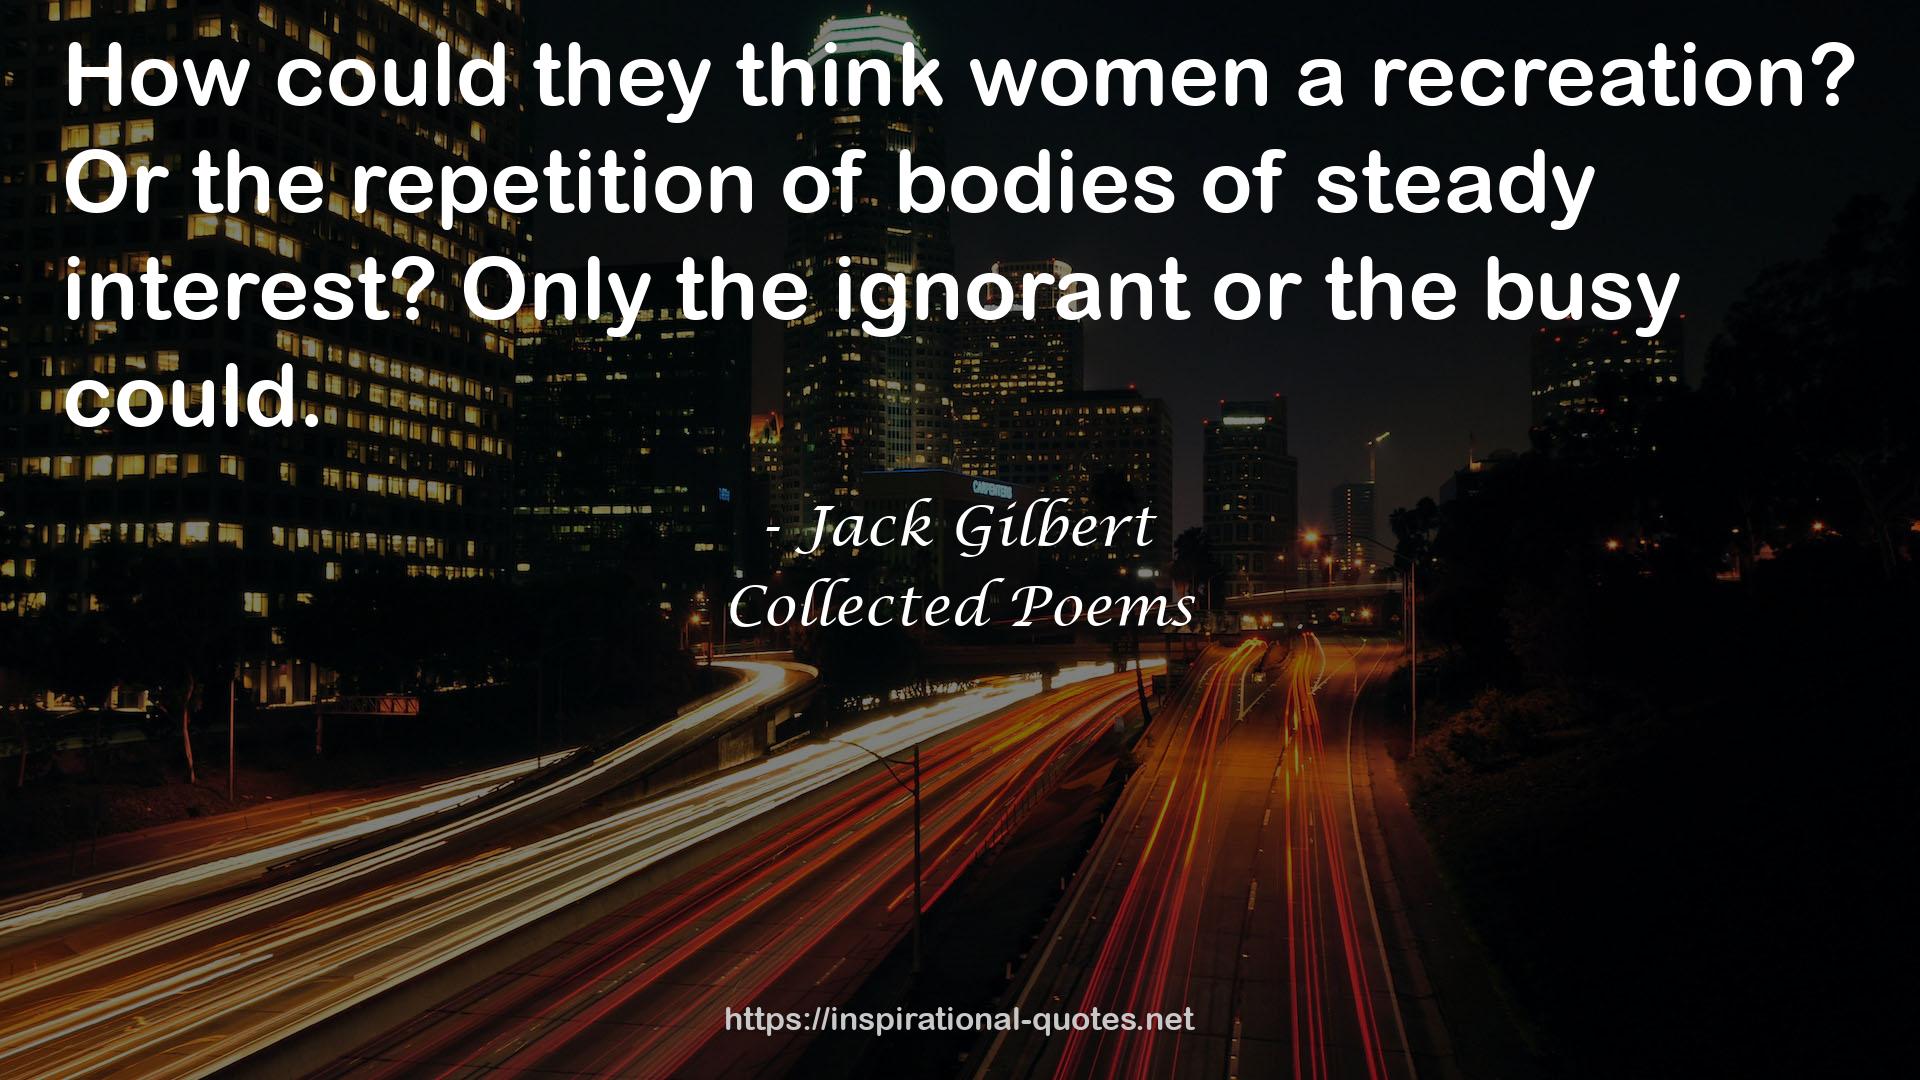 Jack Gilbert QUOTES